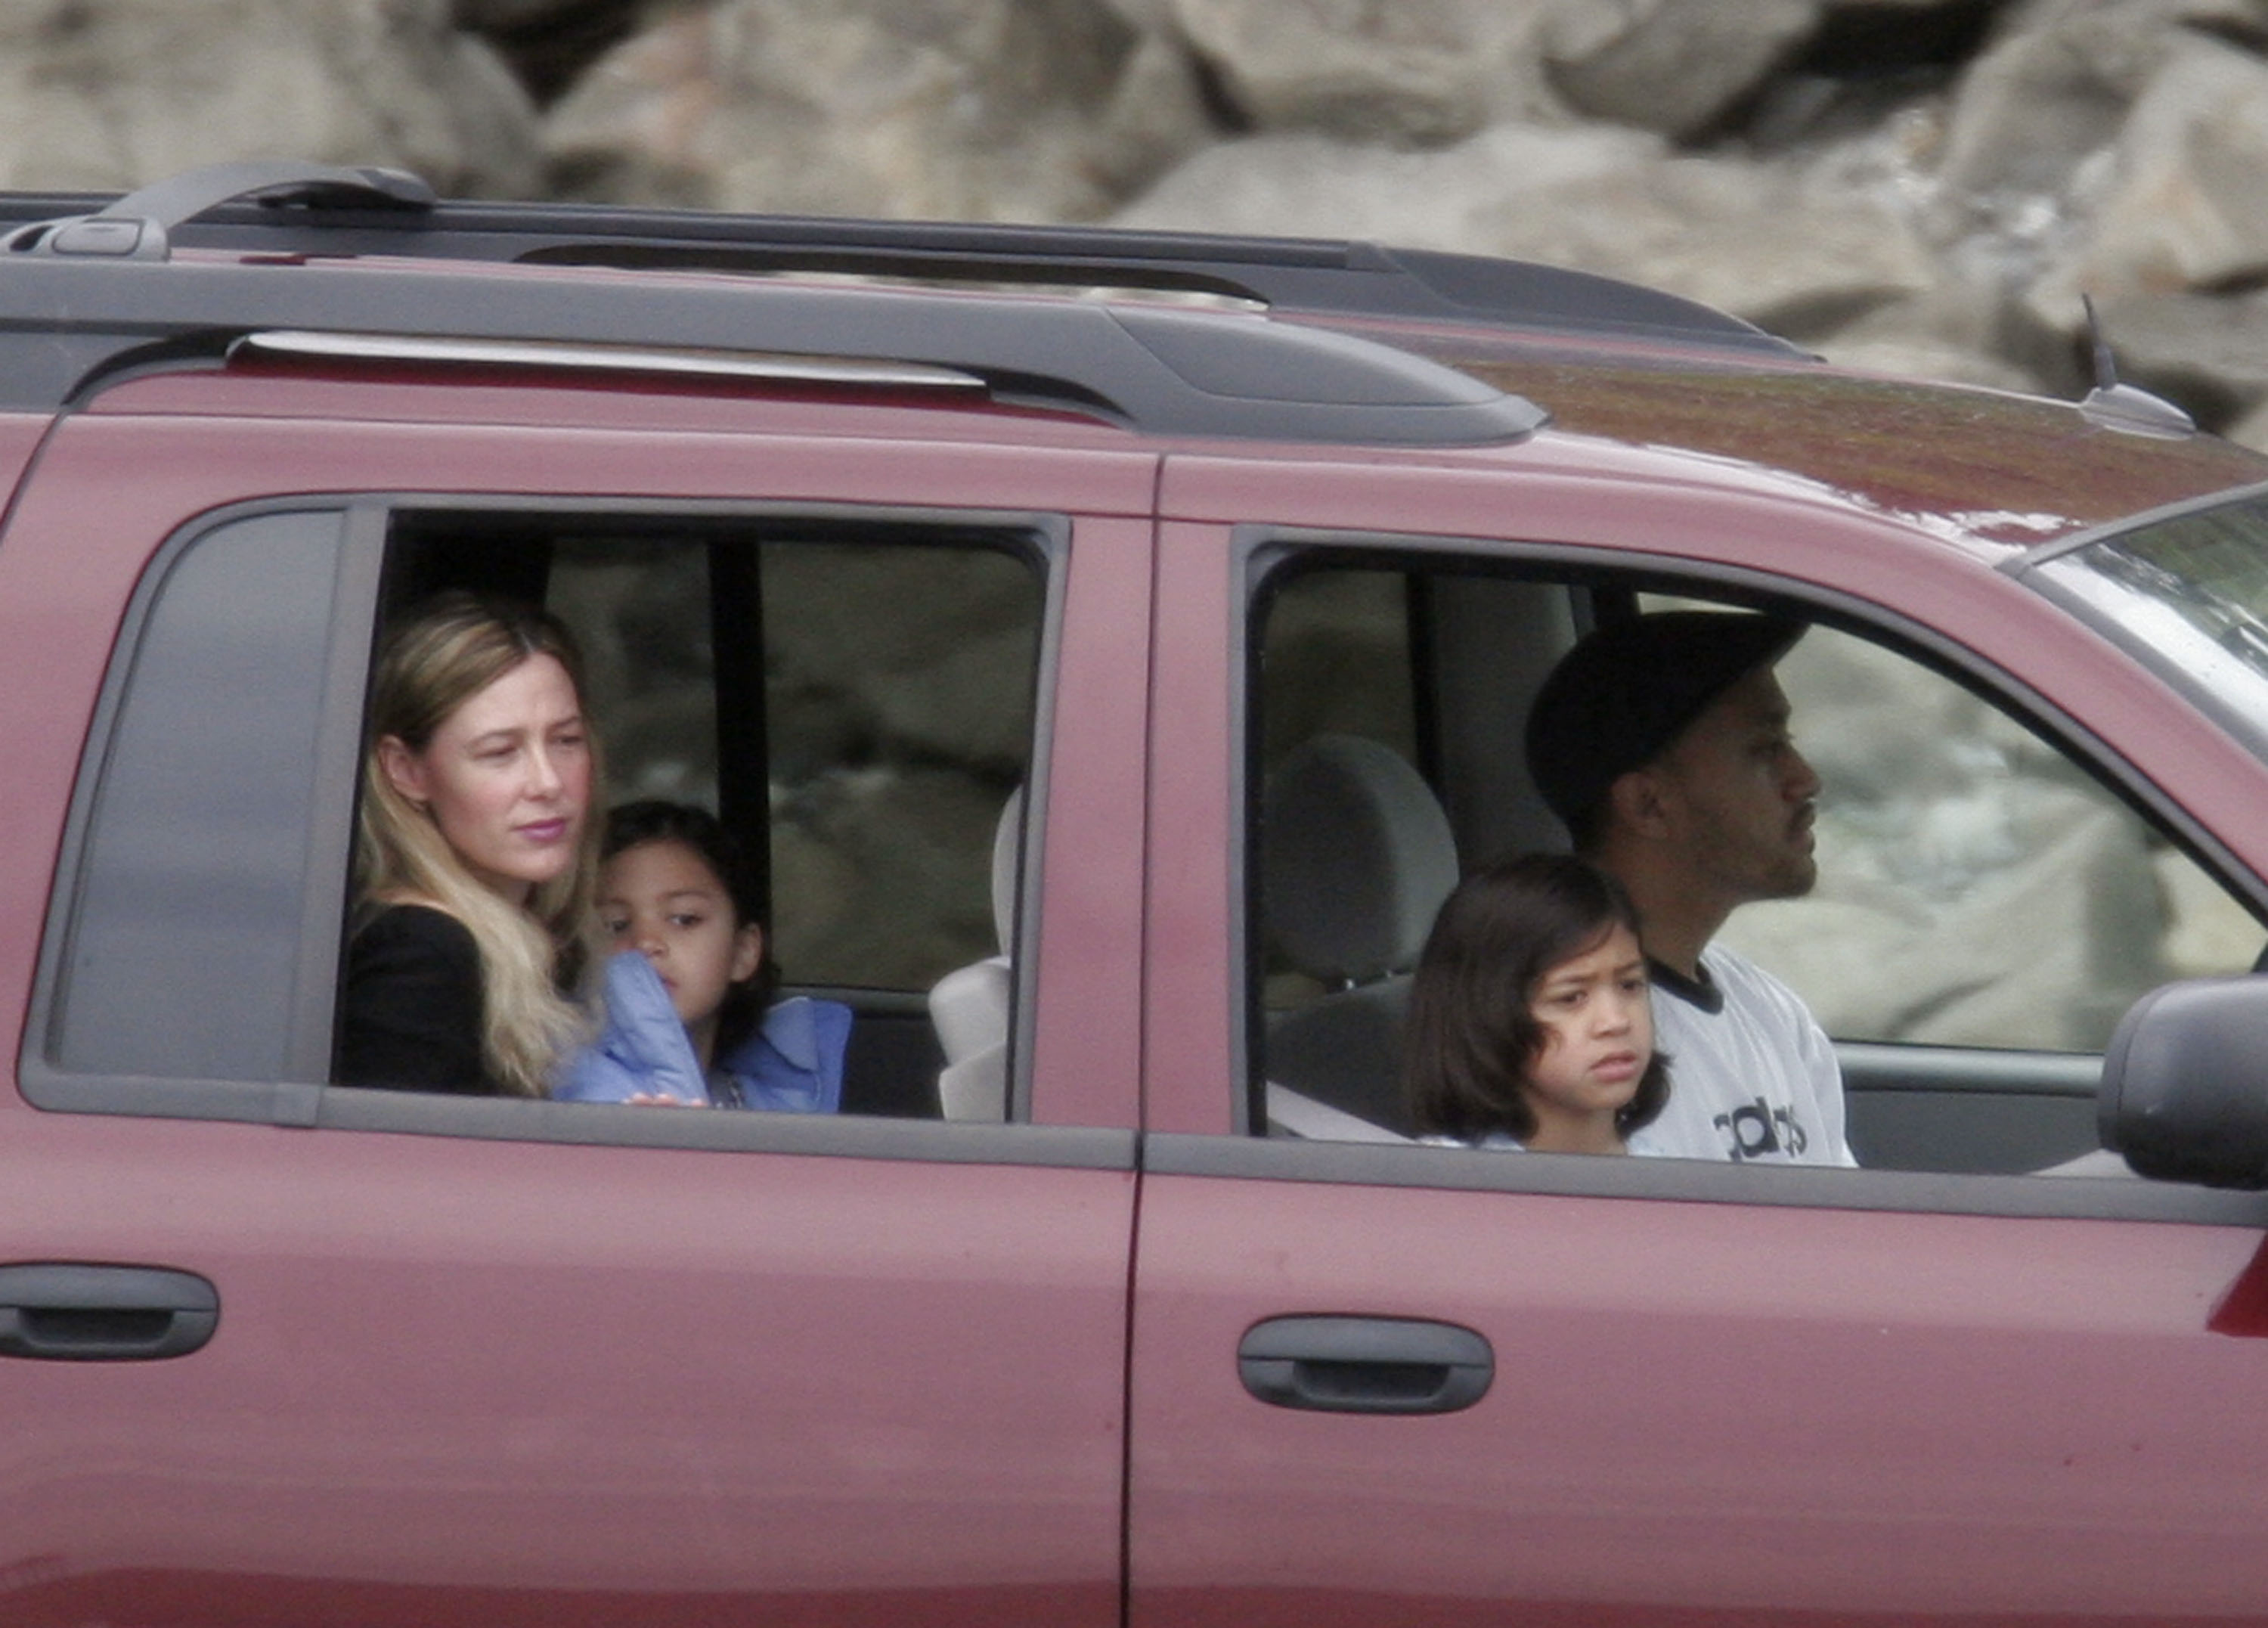 Mary Letourneau, her fiance Vili Fualaau, and their two children drive along the beach